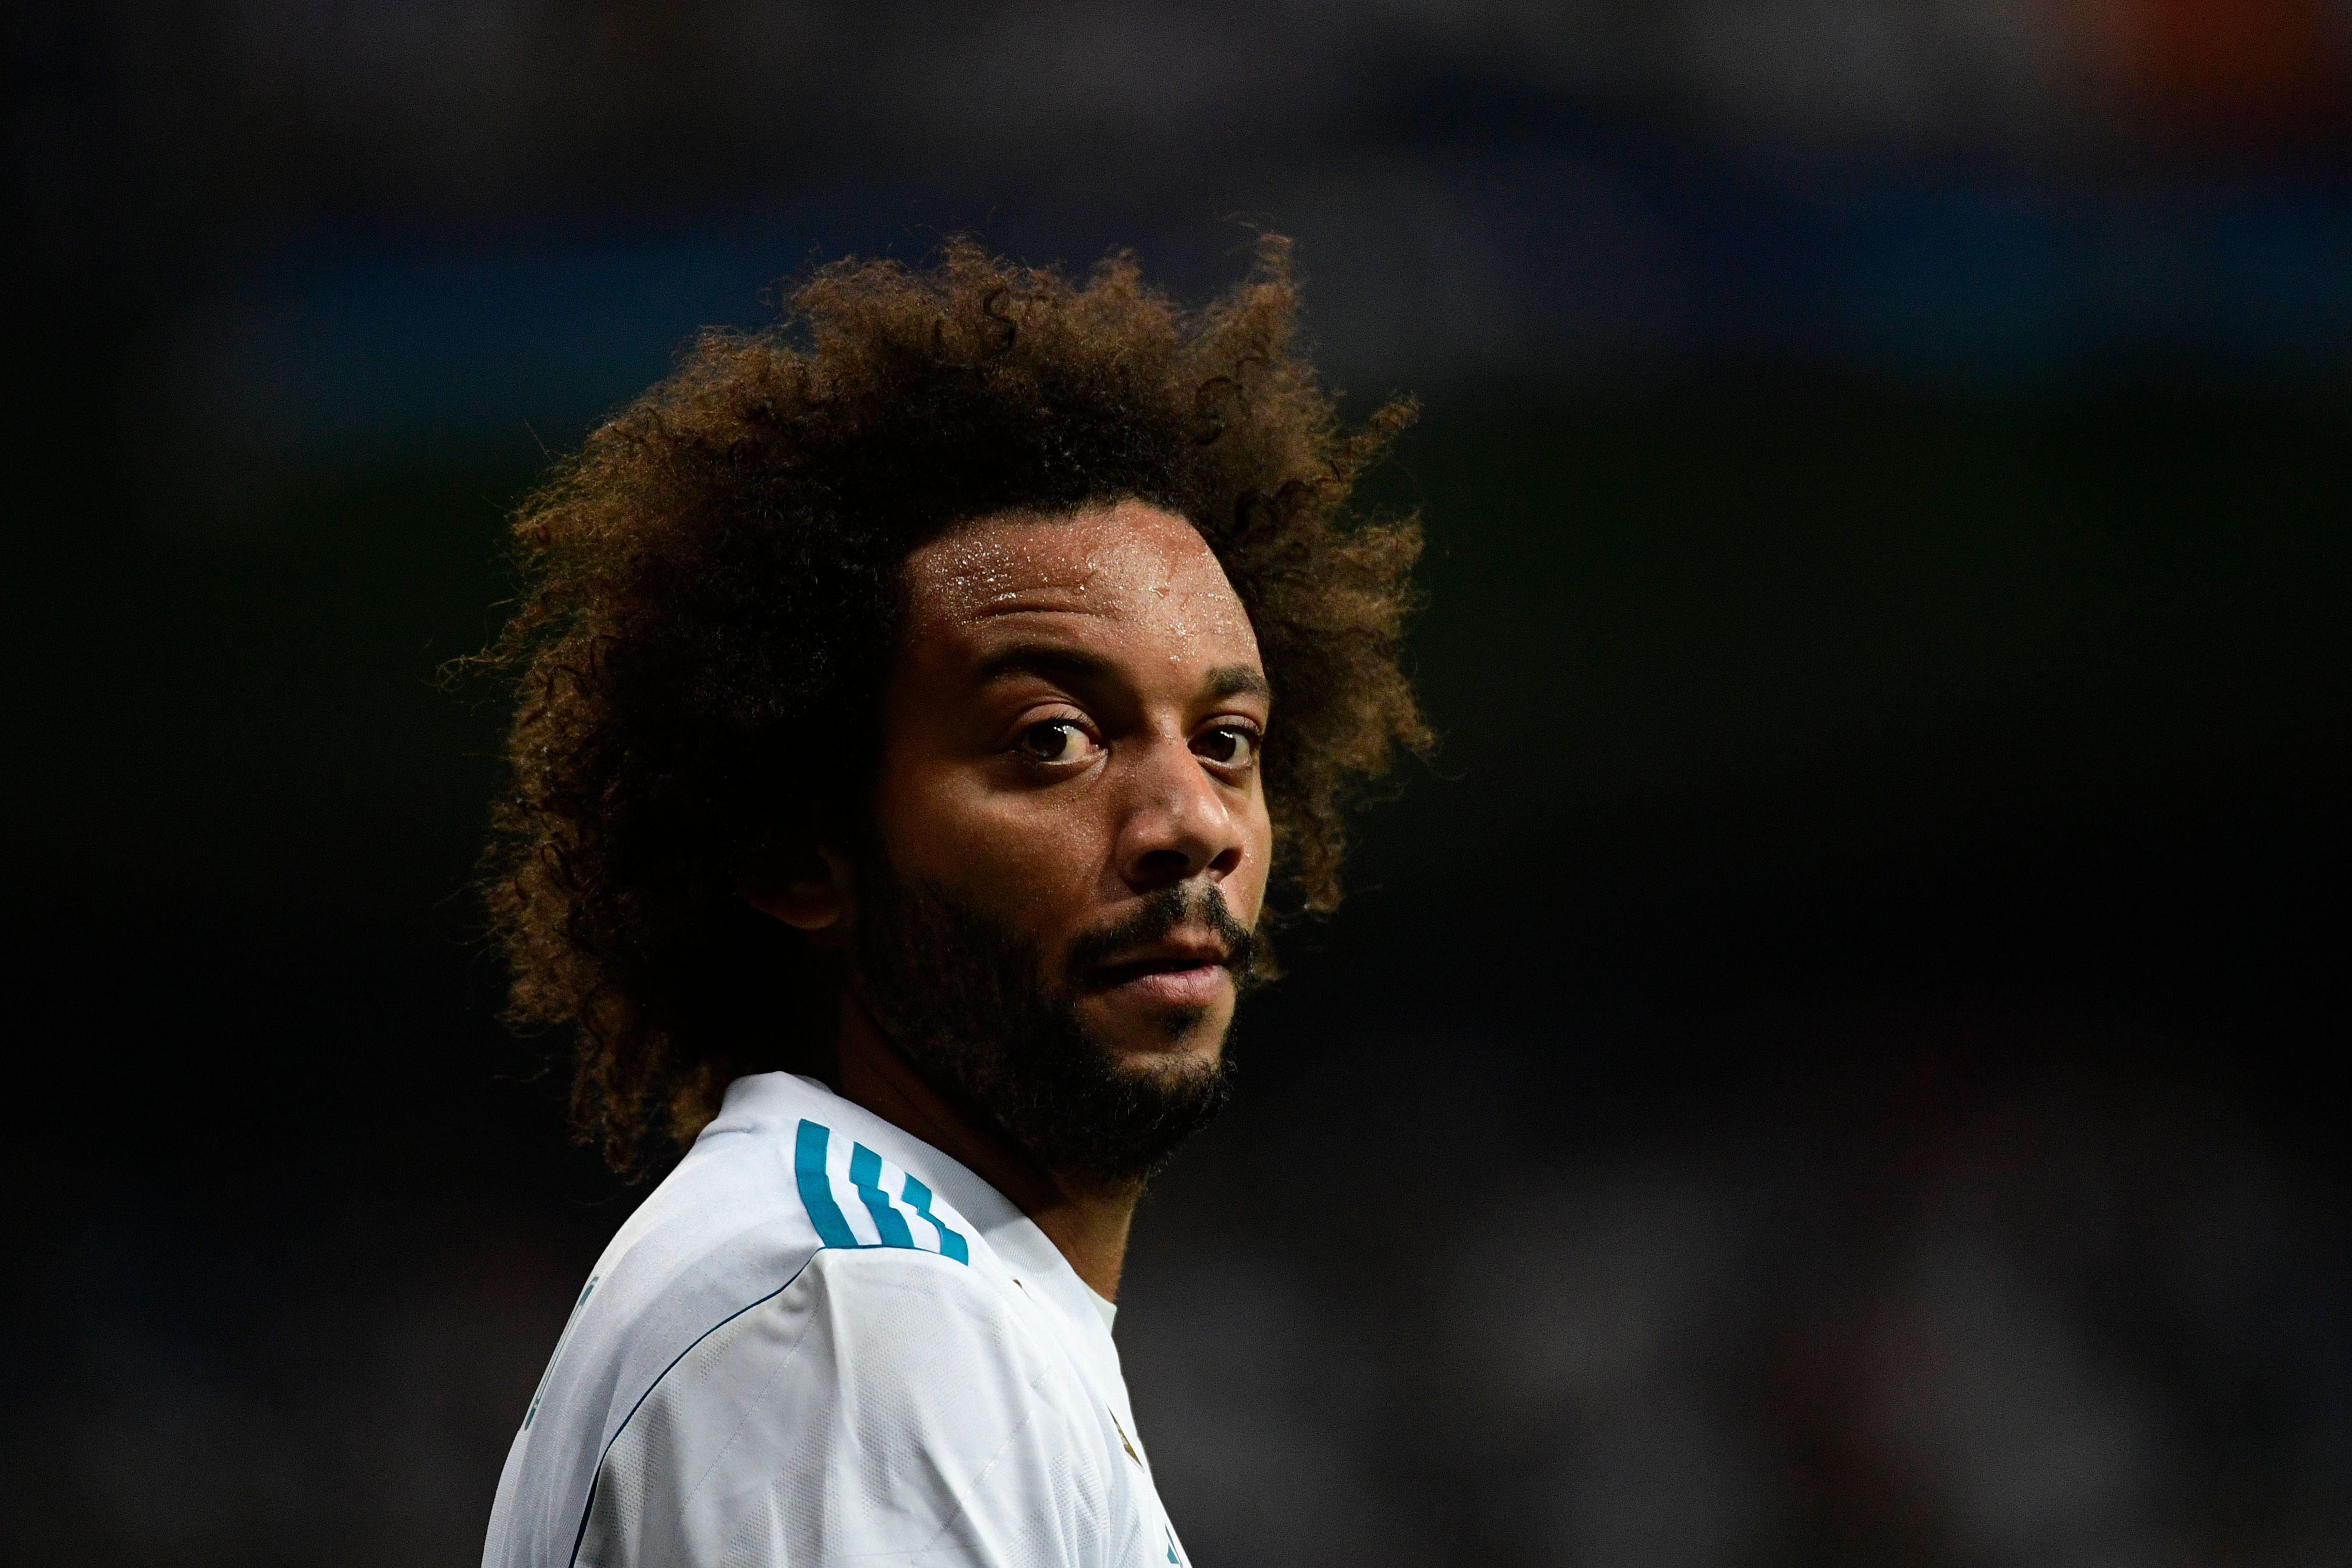 Real Madrid's defender from Brazil Marcelo looks on during the UEFA Champions League football match Real Madrid CF vs APOEL FC at the Santiago Bernabeu stadium in Madrid on September 13, 2017. / AFP PHOTO / PIERRE-PHILIPPE MARCOU        (Photo credit should read PIERRE-PHILIPPE MARCOU/AFP/Getty Images)